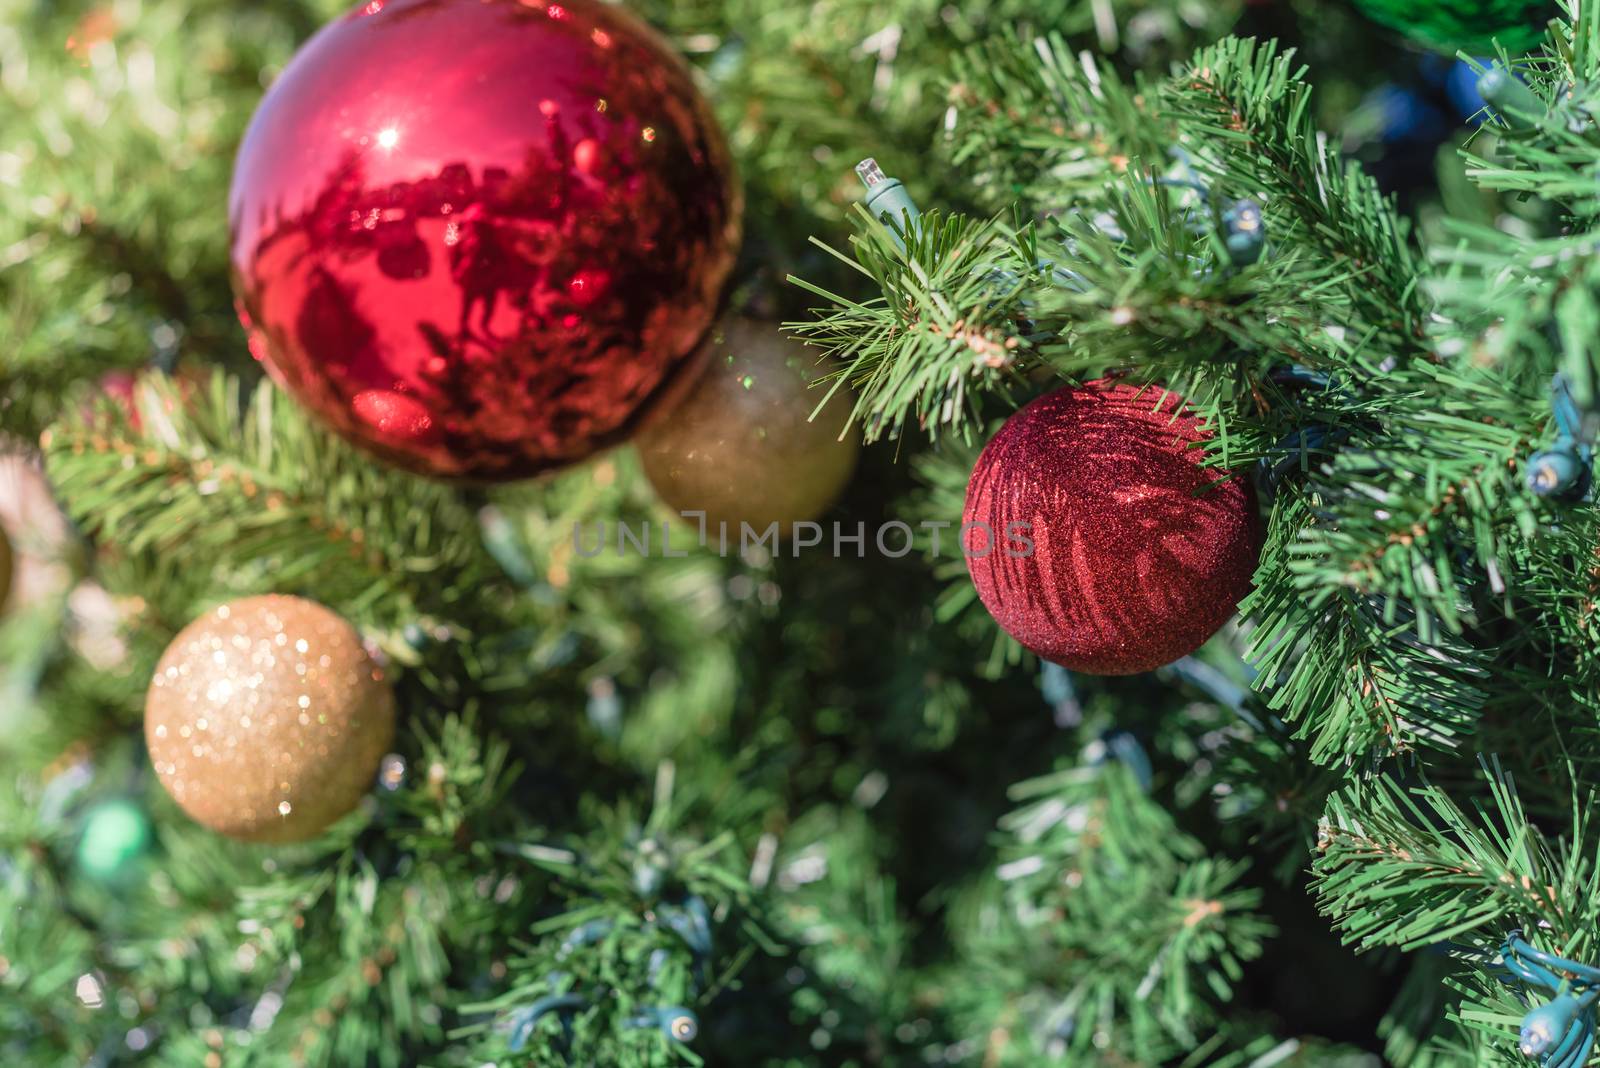 Shiny Christmas red ball hanging on pine branches at daytime light. Baubles and branch of spruce tree. Close-up traditional artificial Xmas tree ball ornament display at public park near Dallas, Texas